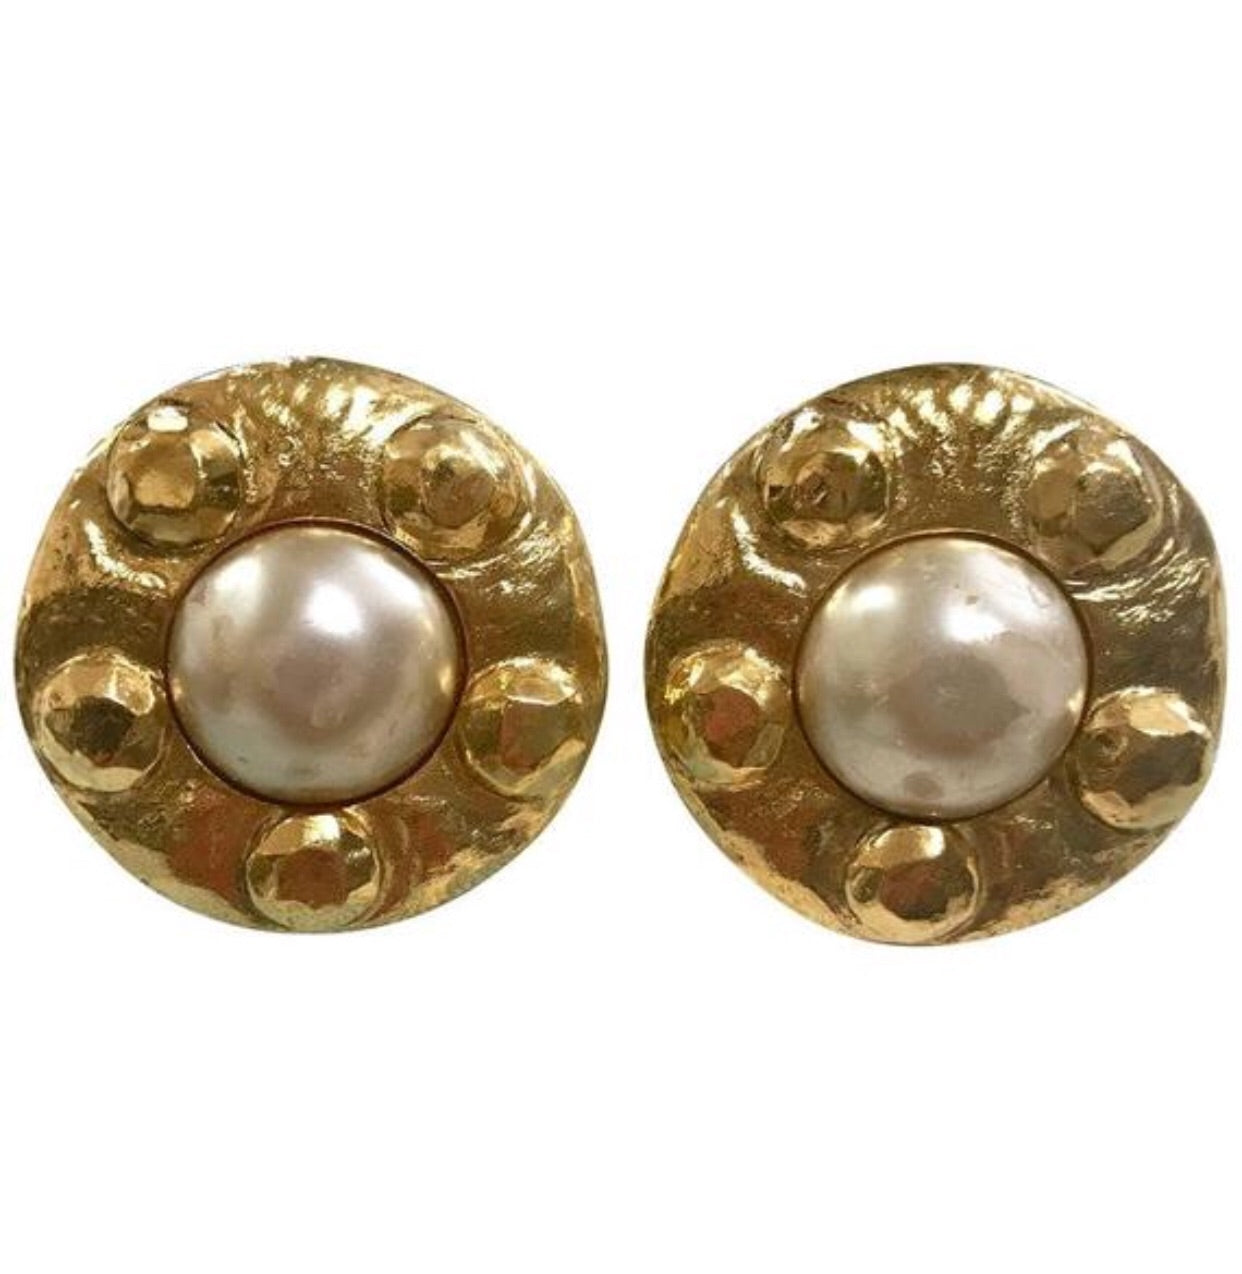 Vintage CHANEL gold tone large round earrings with faux pearl. Classic jewelry.